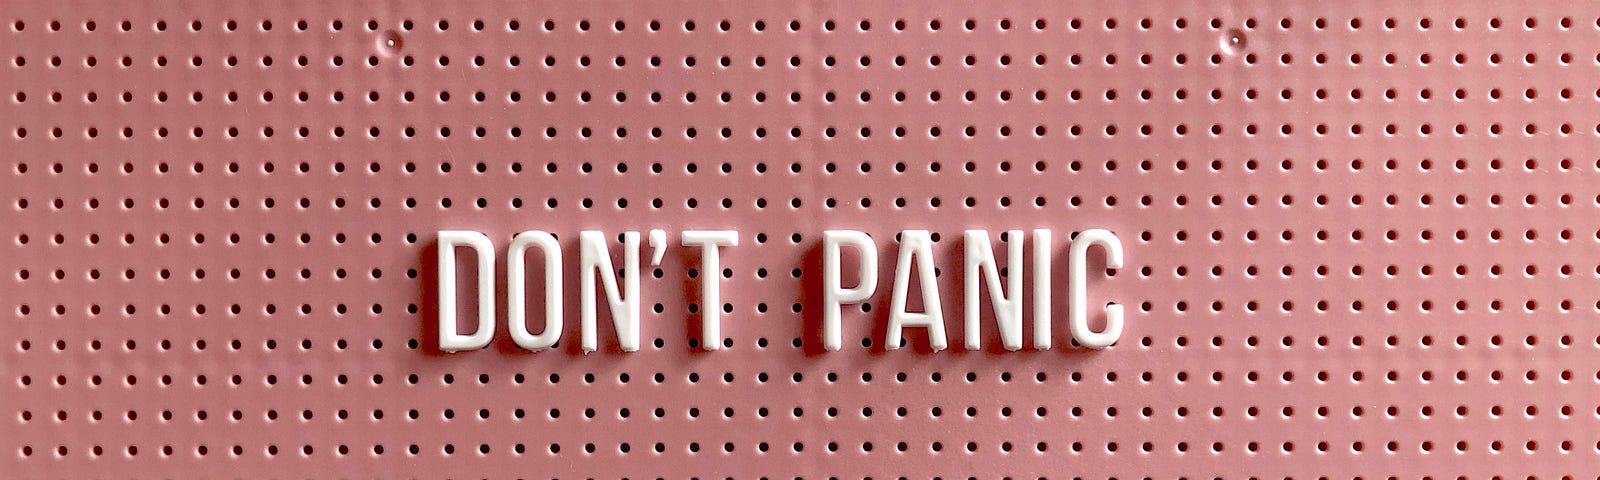 Pink pinboard with the words “Don’t Panic” pinned to it